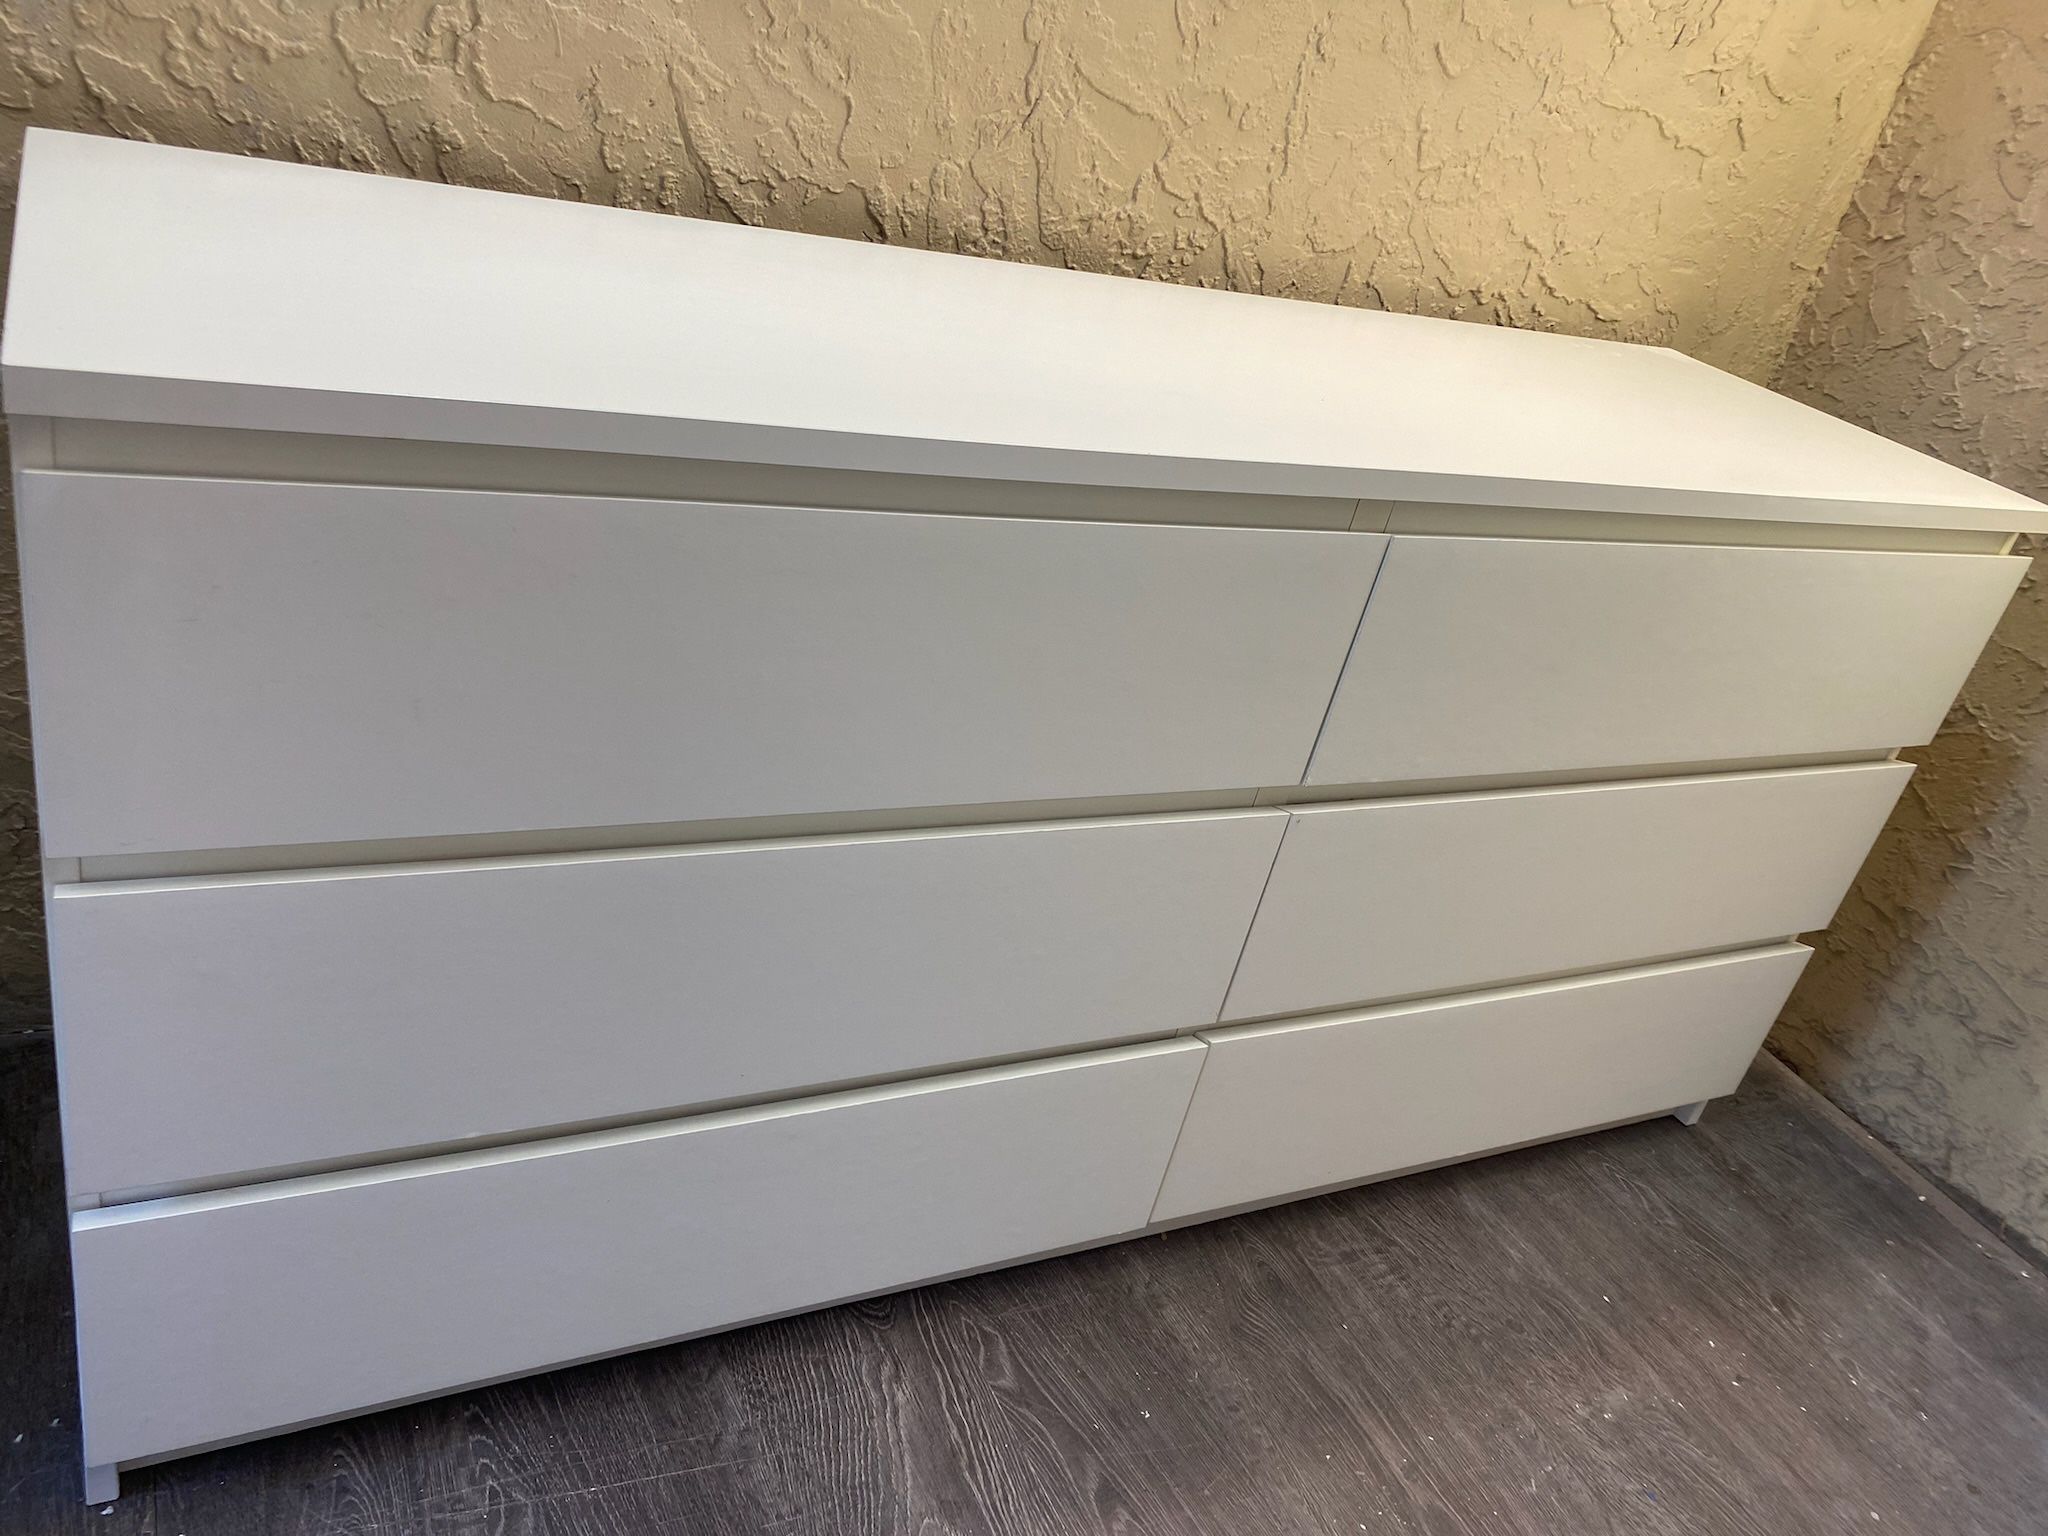 Large White Six Drawer Dresser - Delivery Available For A Fee - See My Other Items 😀